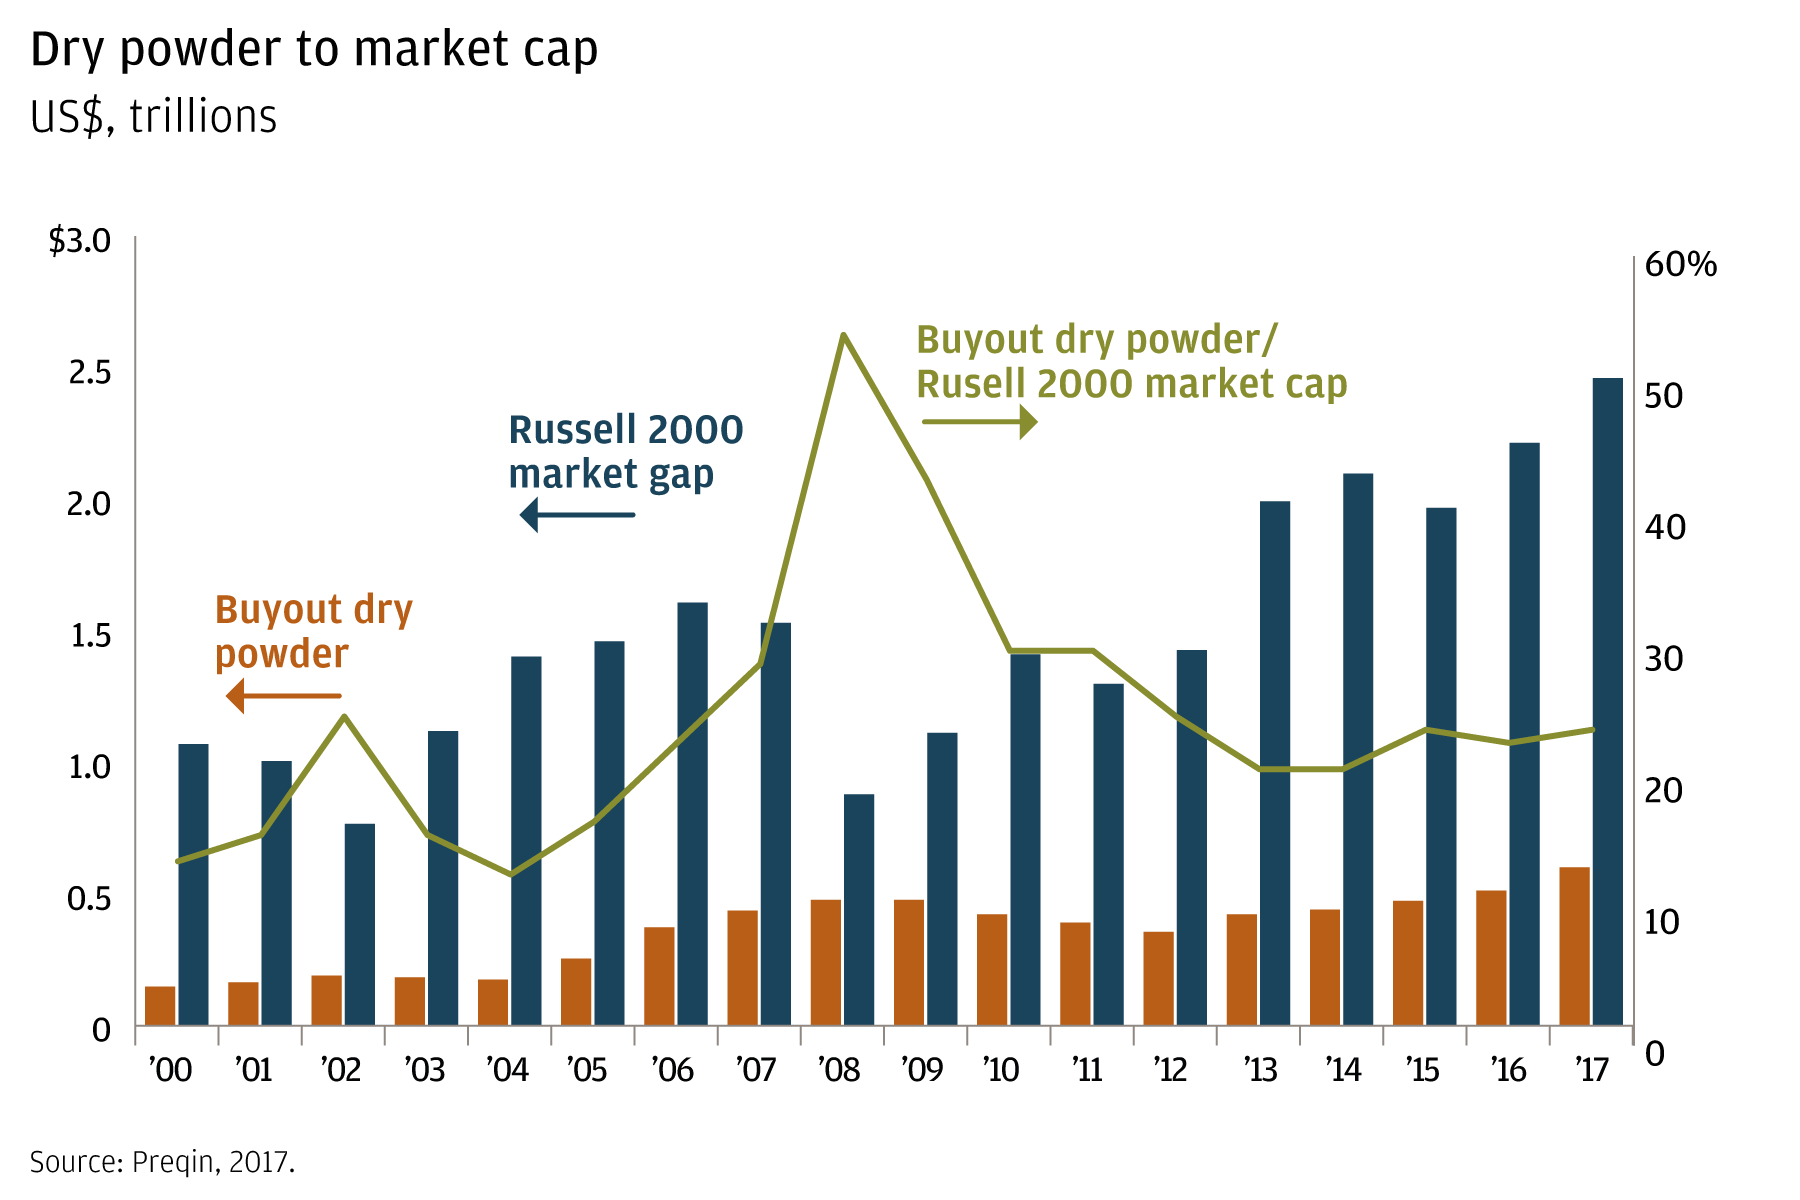 Bar chart showing yearly ratio of buyout dry powder to Russell 2000 market cap, in dollars and percentages, 2000–2017